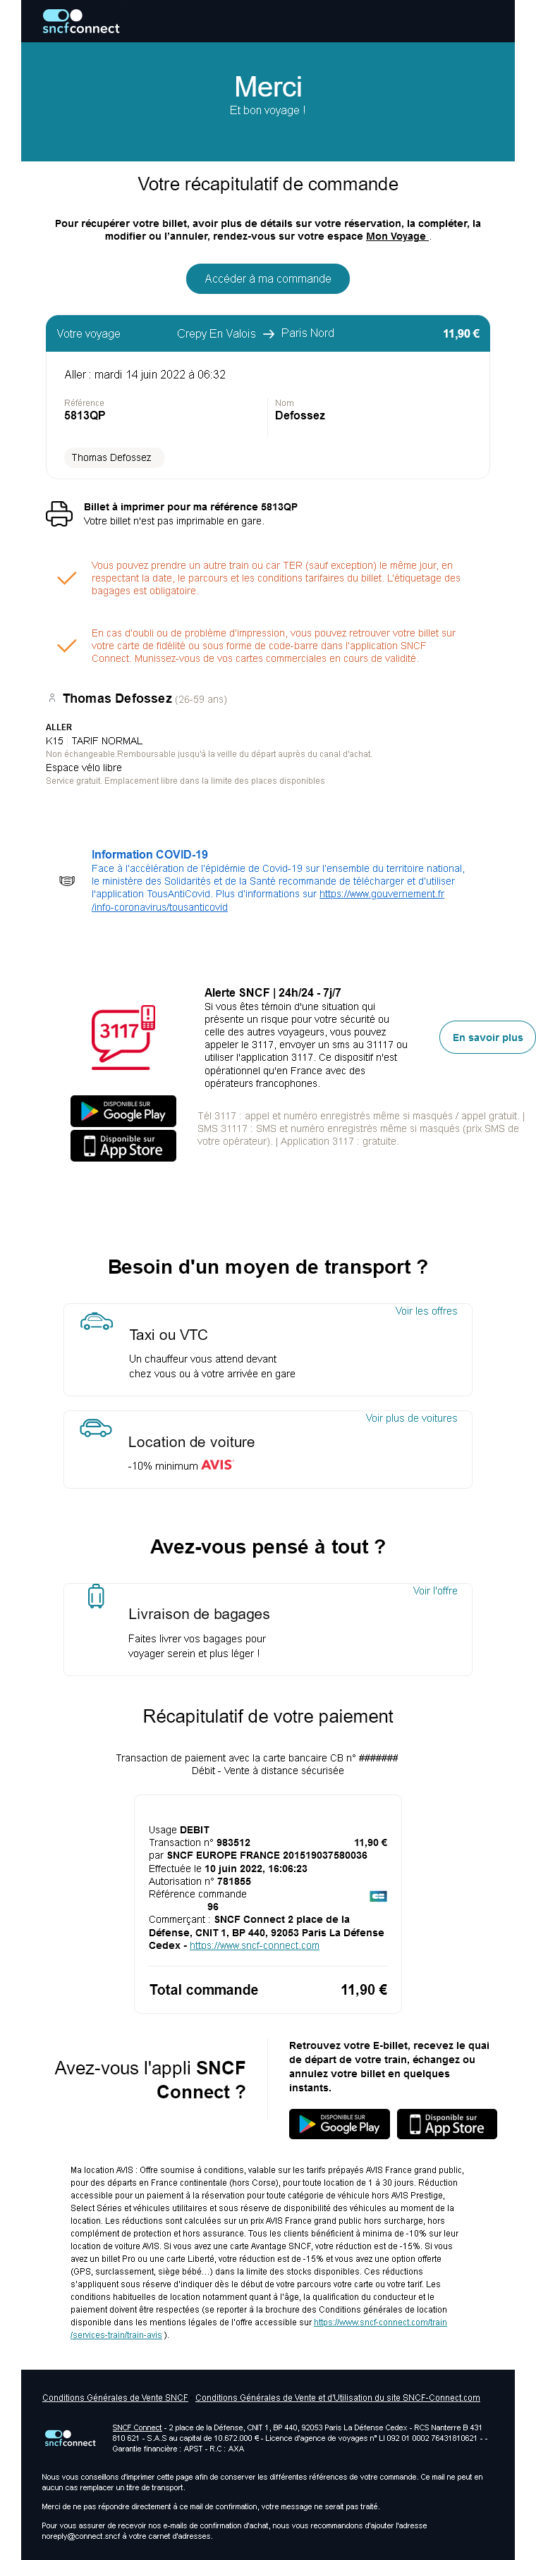 sncf connect exemple email